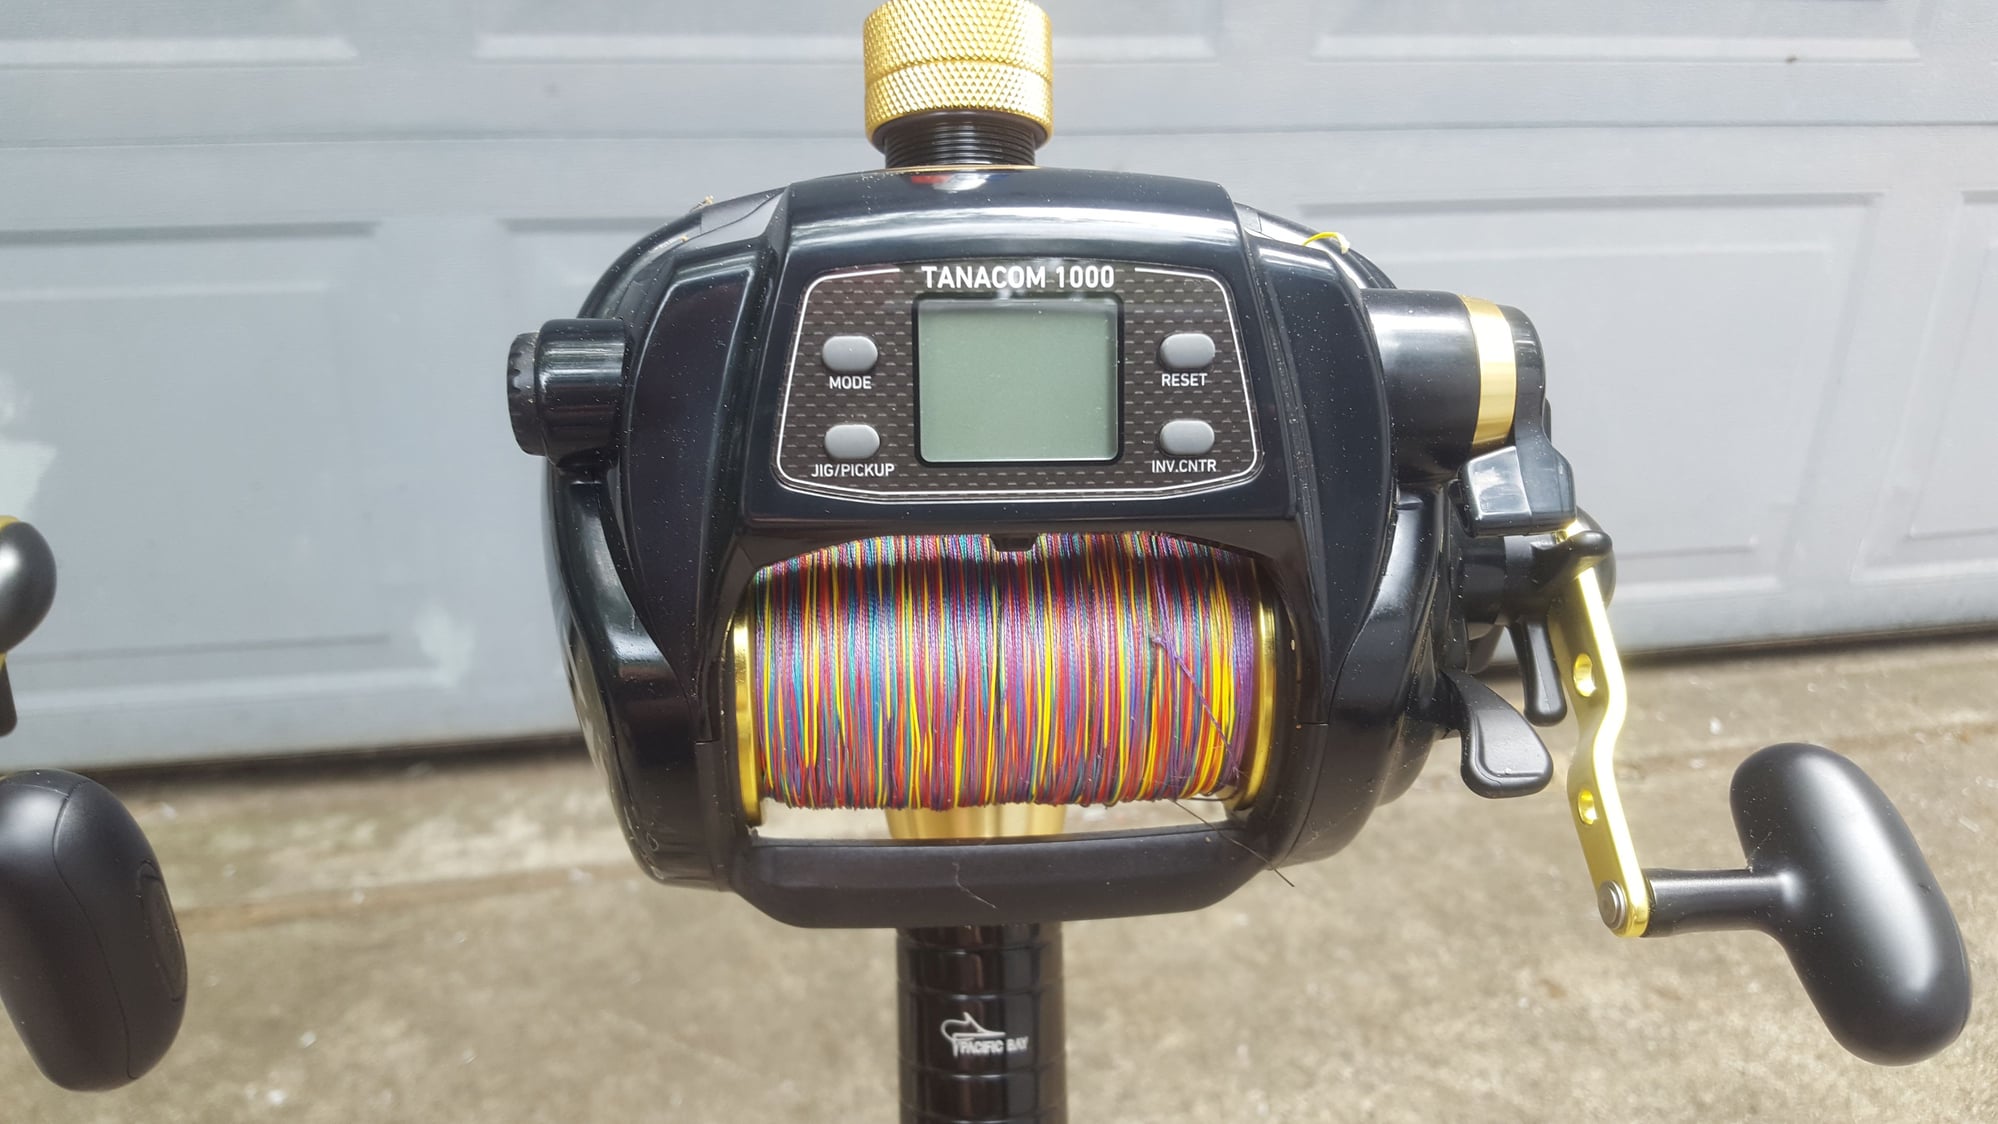 Daiwa Tanacom 1000 Electric Reel Combos NEVER USED - Sold - The Hull Truth  - Boating and Fishing Forum